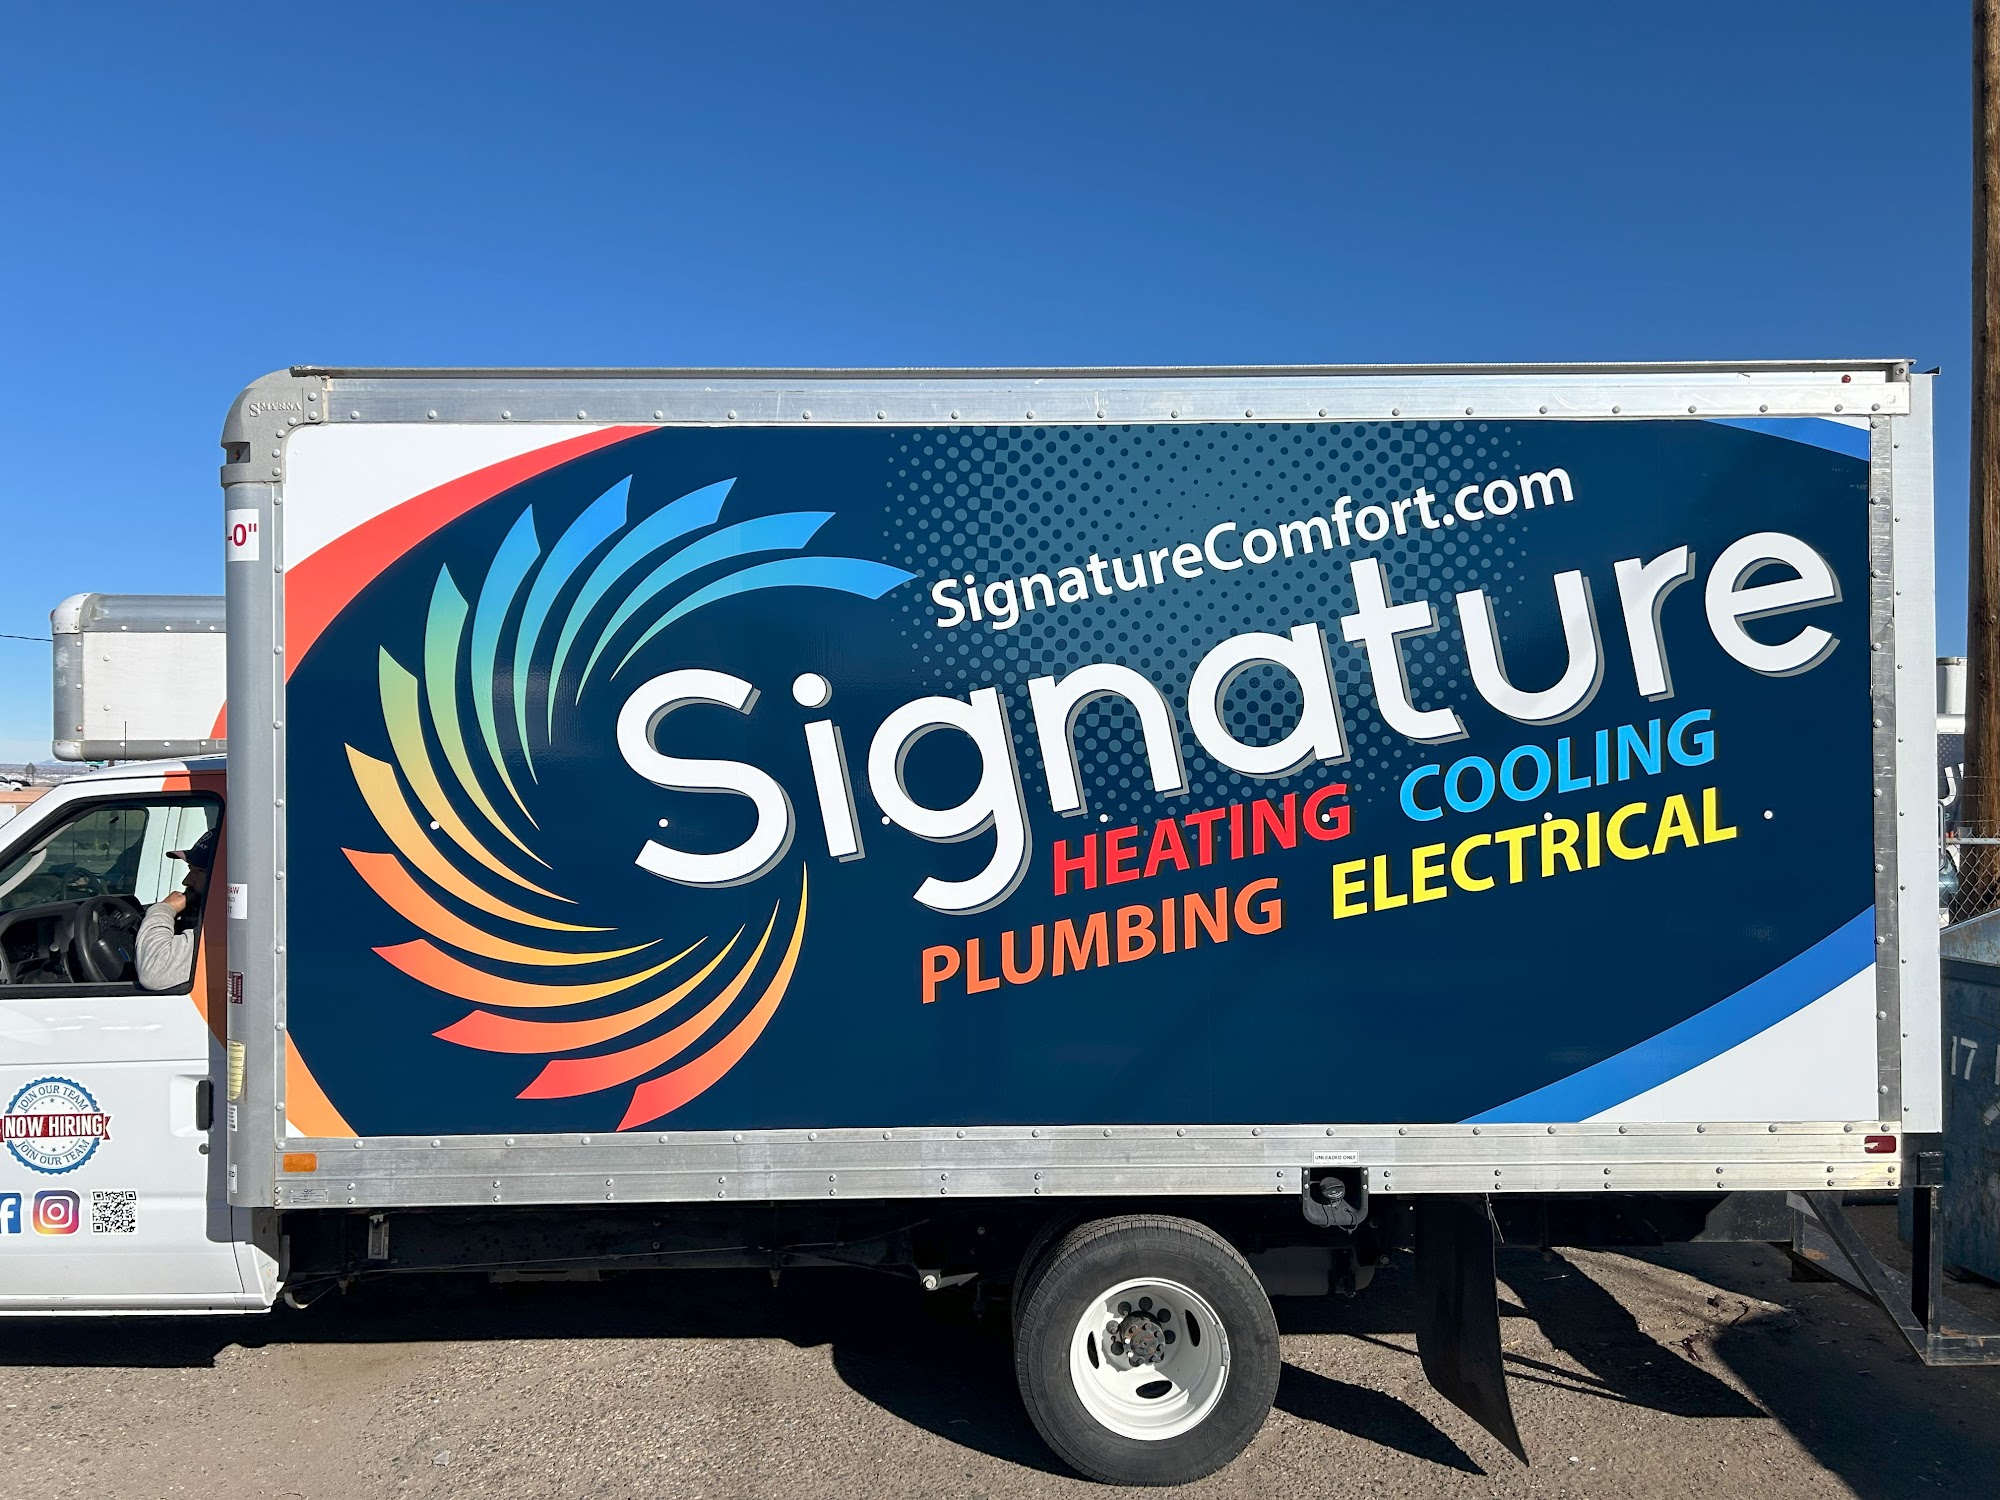 Signature Heating, Cooling, Plumbing & Electrical